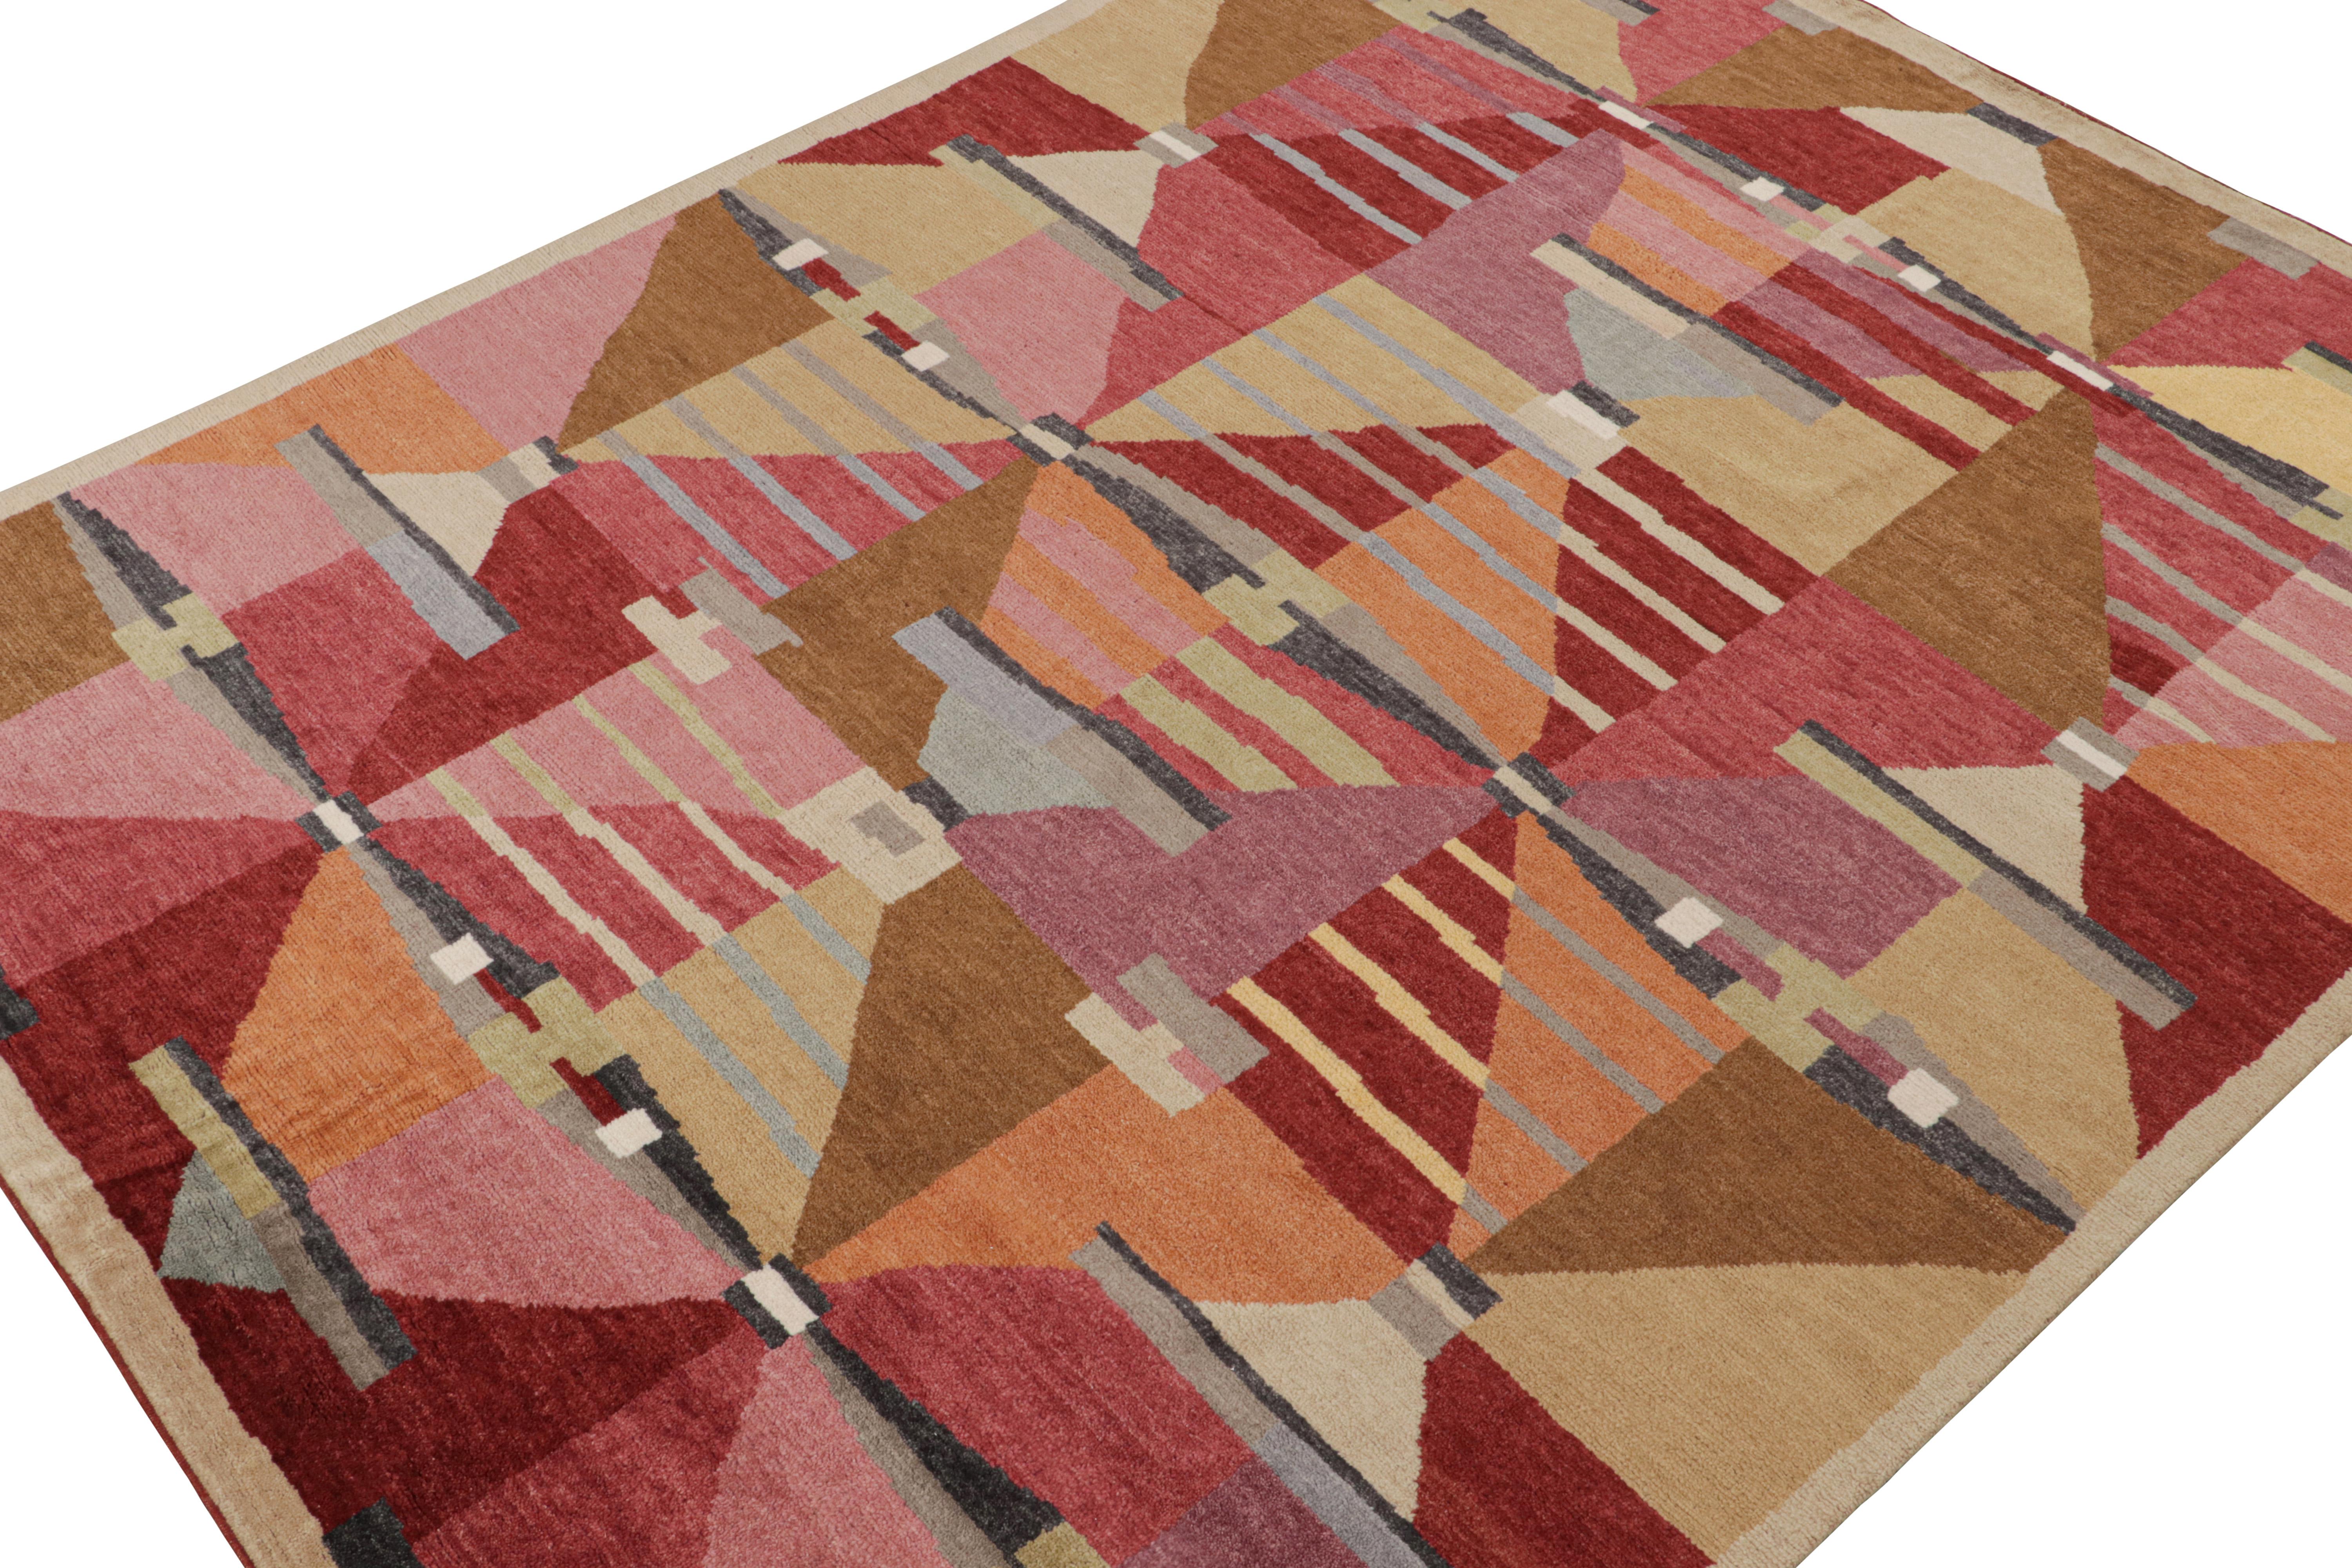 Hand-knotted in wool, this custom rug design represents the pile texture from the Scandinavian rug collection by Rug & Kilim. 

On the Design:

These photos represent a recently sold 9x12 rug in this style—inspired by mid-century rya rugs in the